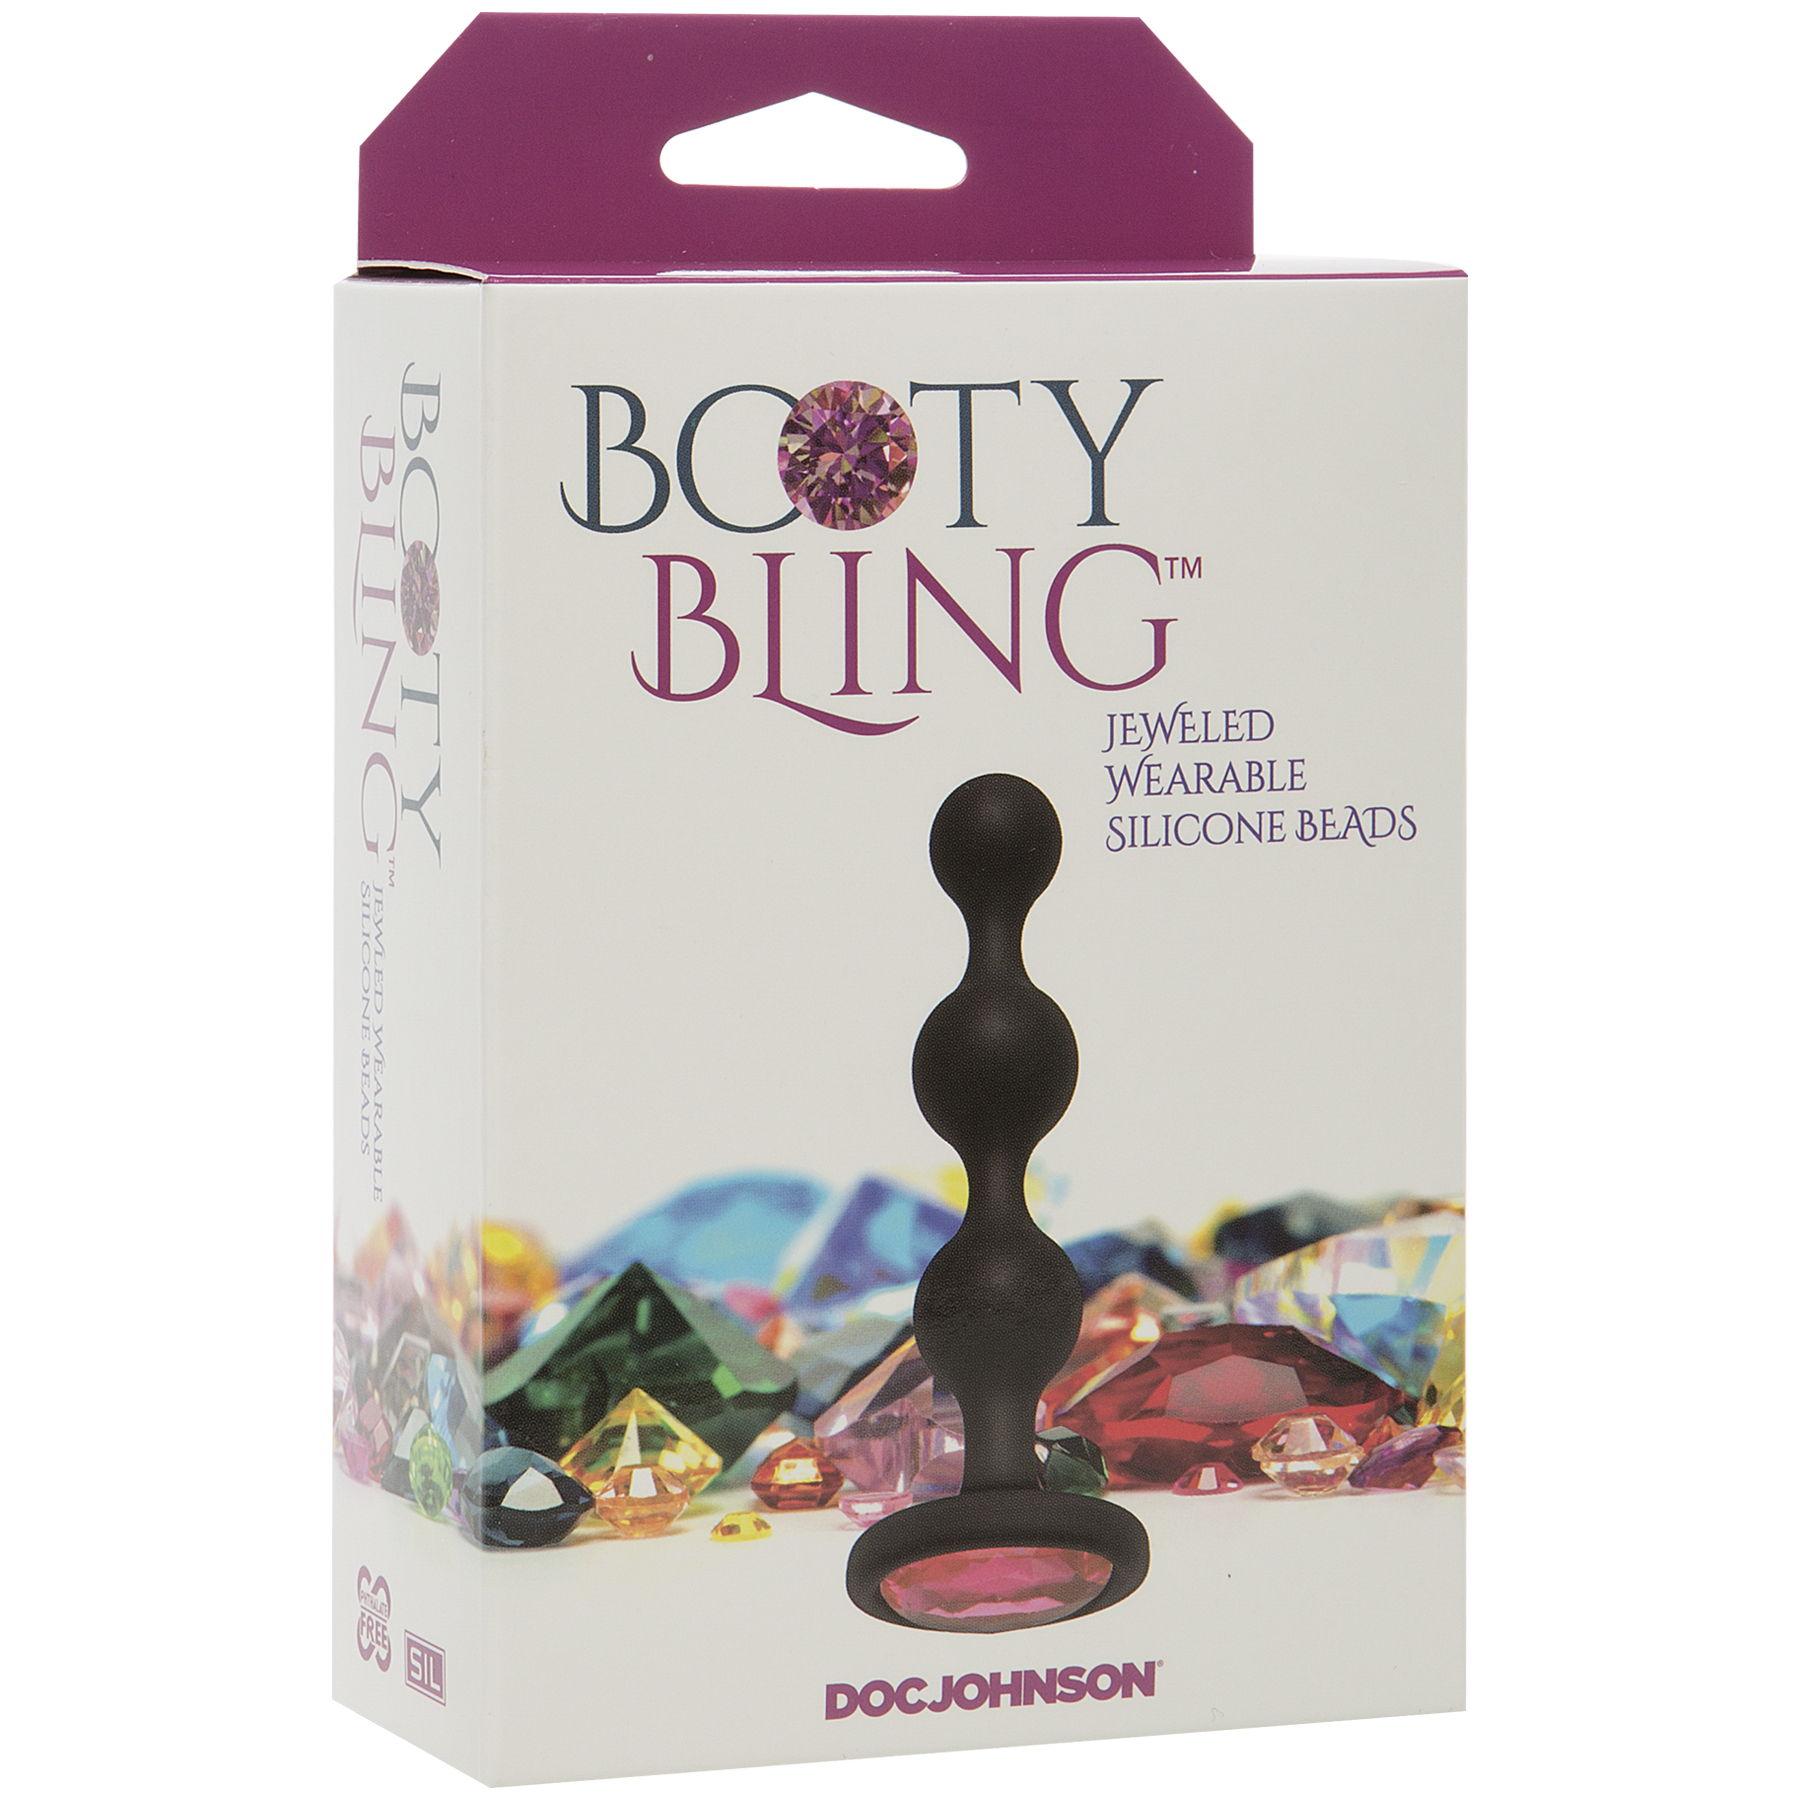 Booty Bling Wearable Silicone Beads - Pink - Thorn & Feather Sex Toy Canada